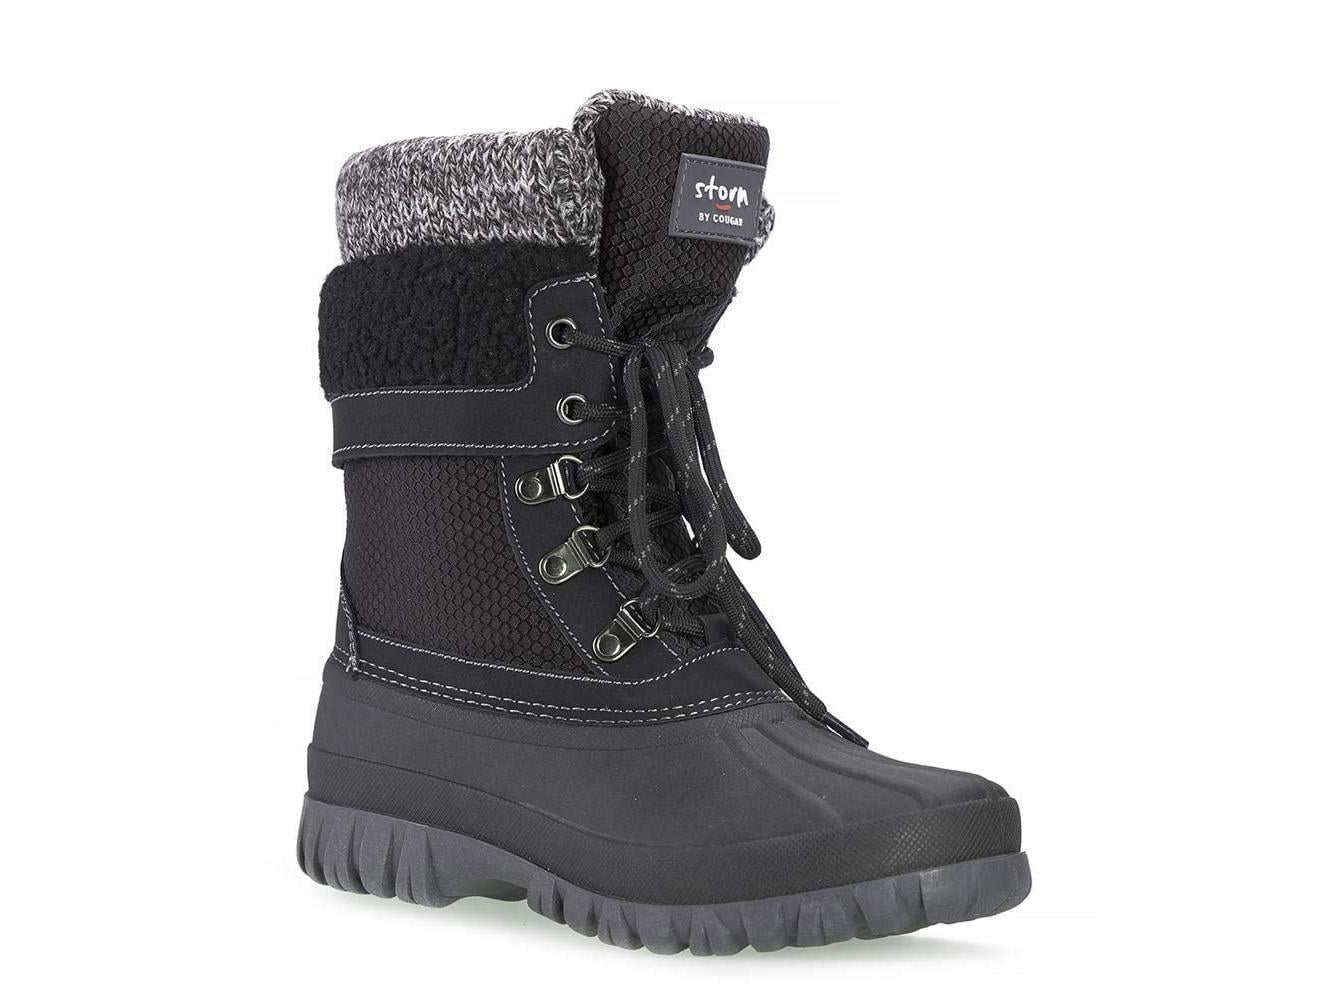 storm by cougar snow boots